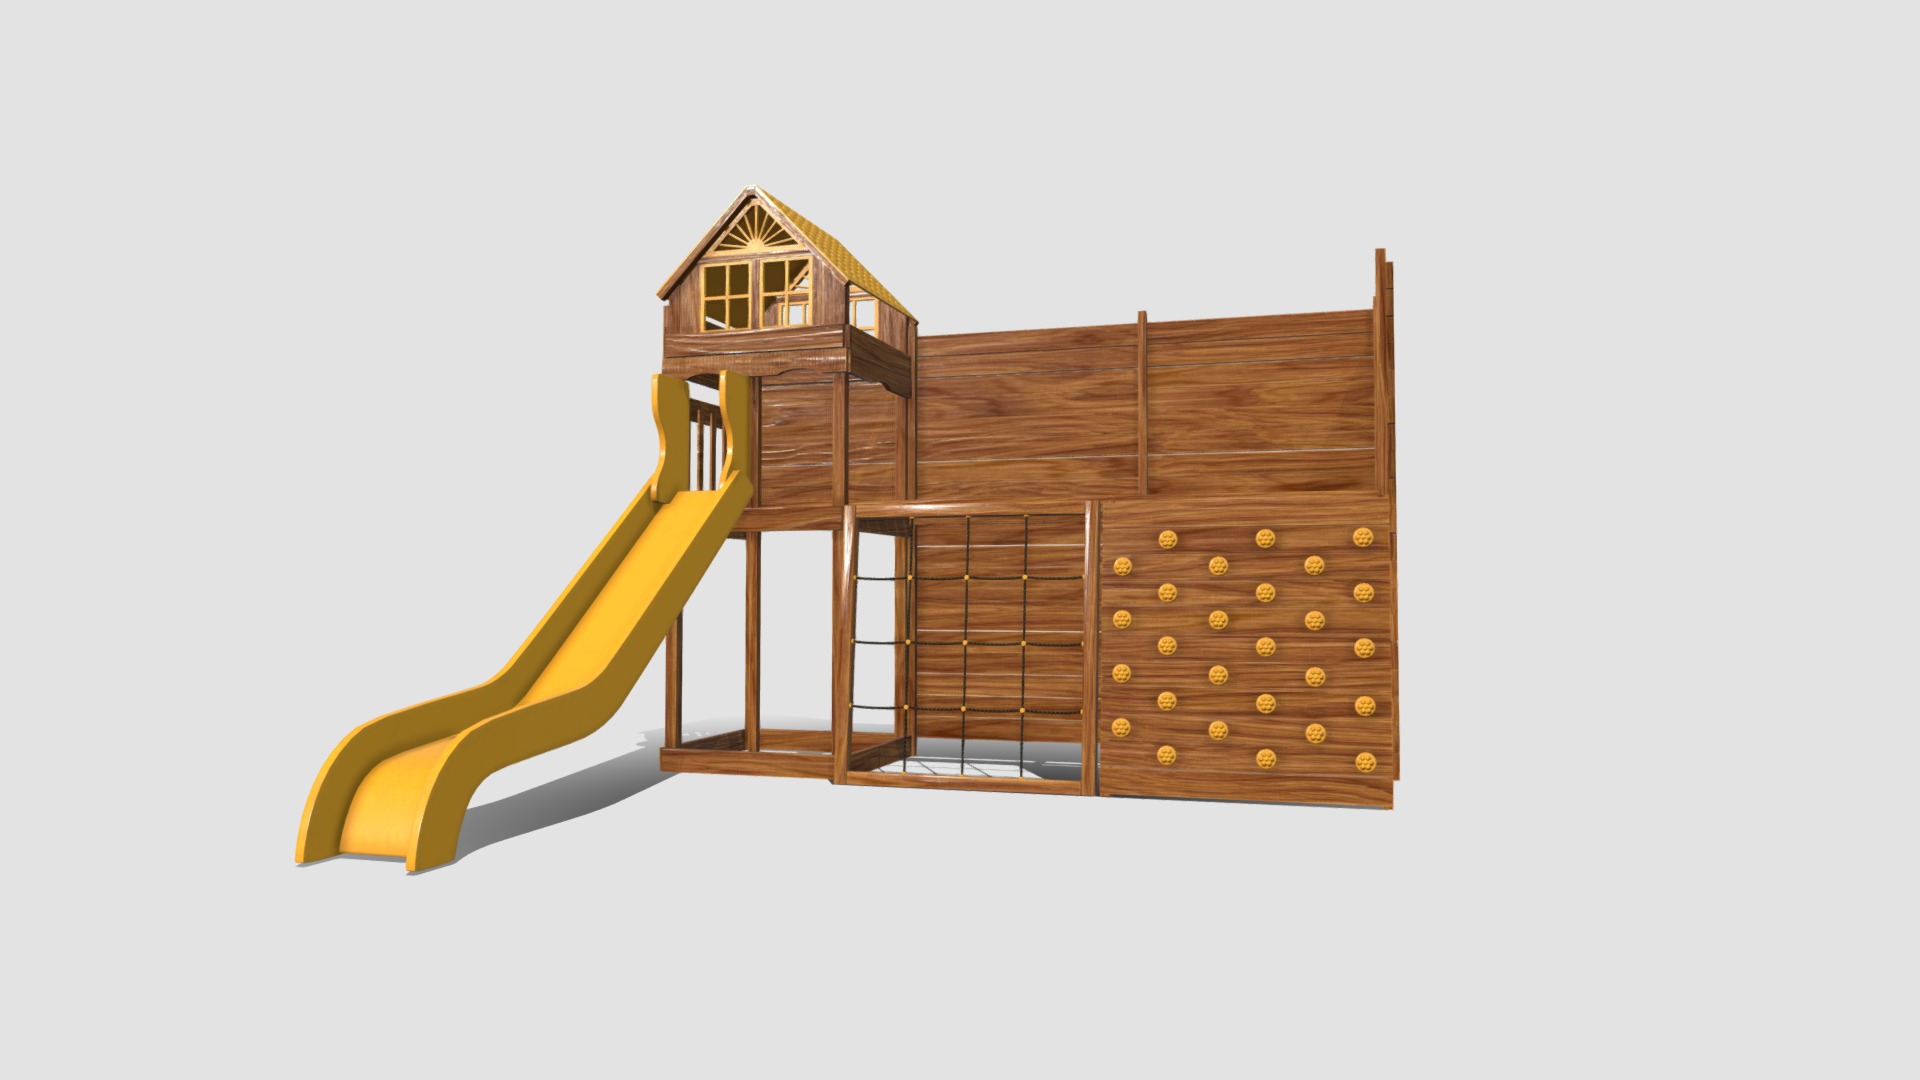 3D model Childrens wood slide - This is a 3D model of the Childrens wood slide. The 3D model is about a wooden house with a yellow slide.